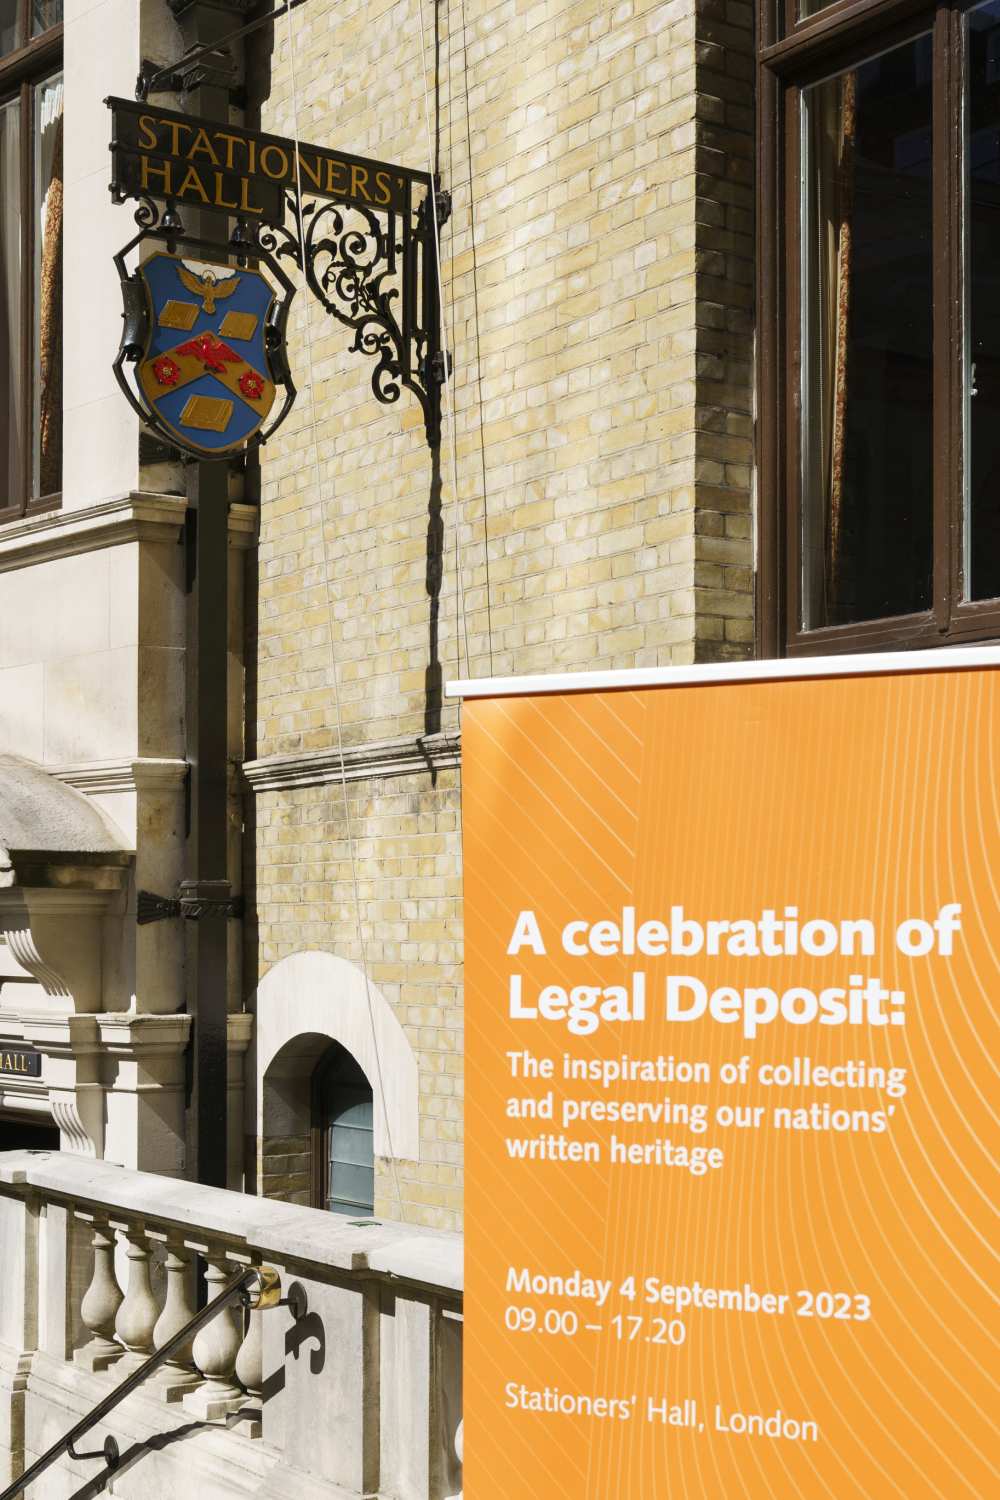 A londoni Stationers’ Hall bejárata. A Celebration of Legal Deposit: The Inspiration of Collecting and Preserving our Nations’ Written Heritage című konferencia (2023.09.04.) helyszíne. A kép forrása: British Library